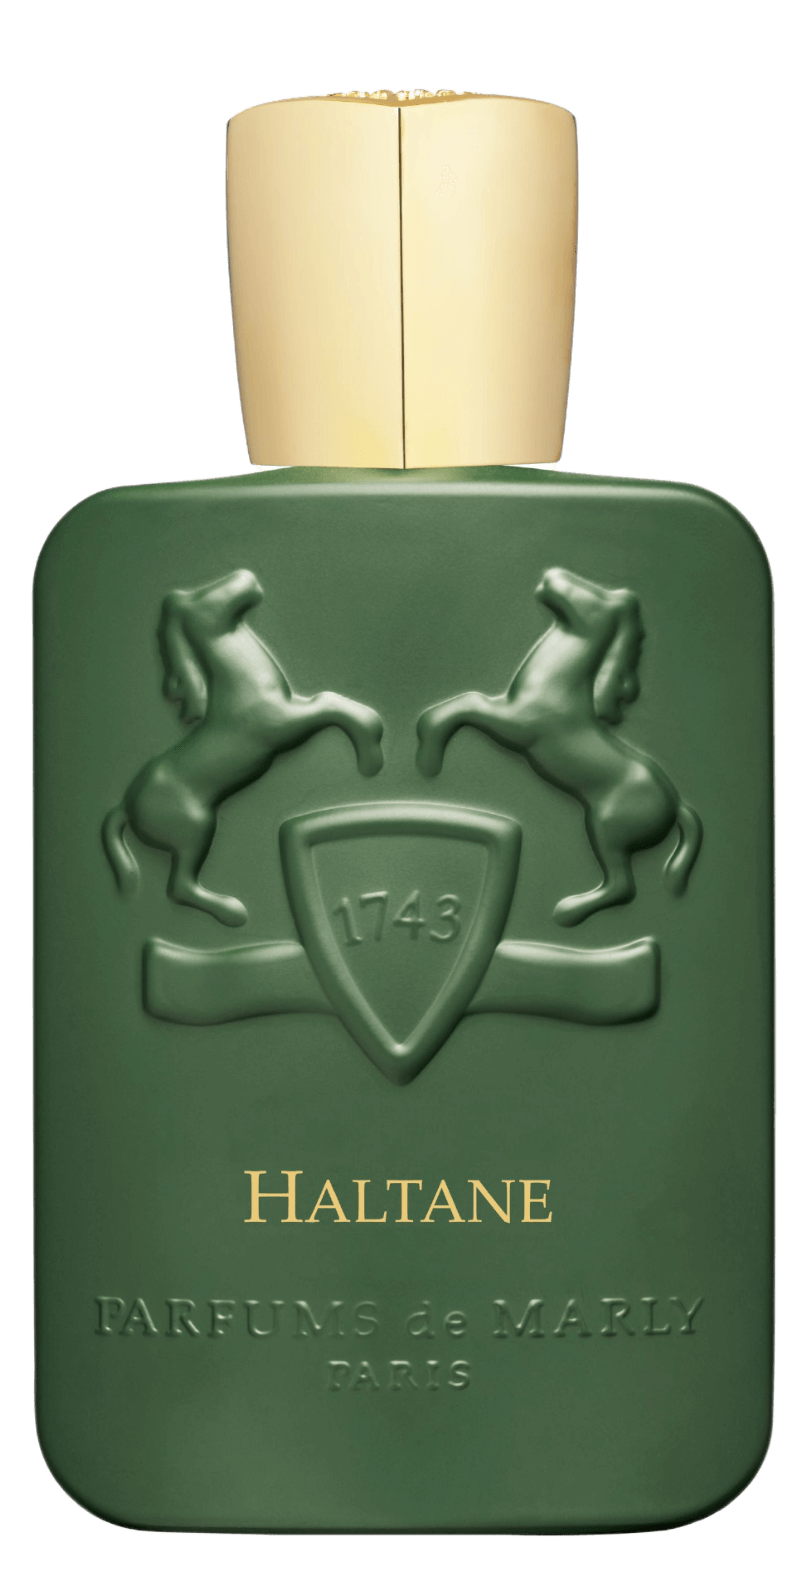 Parfums de Marly's Parfums de Marly Haltane from Bellini's Skin and Parfumerie 